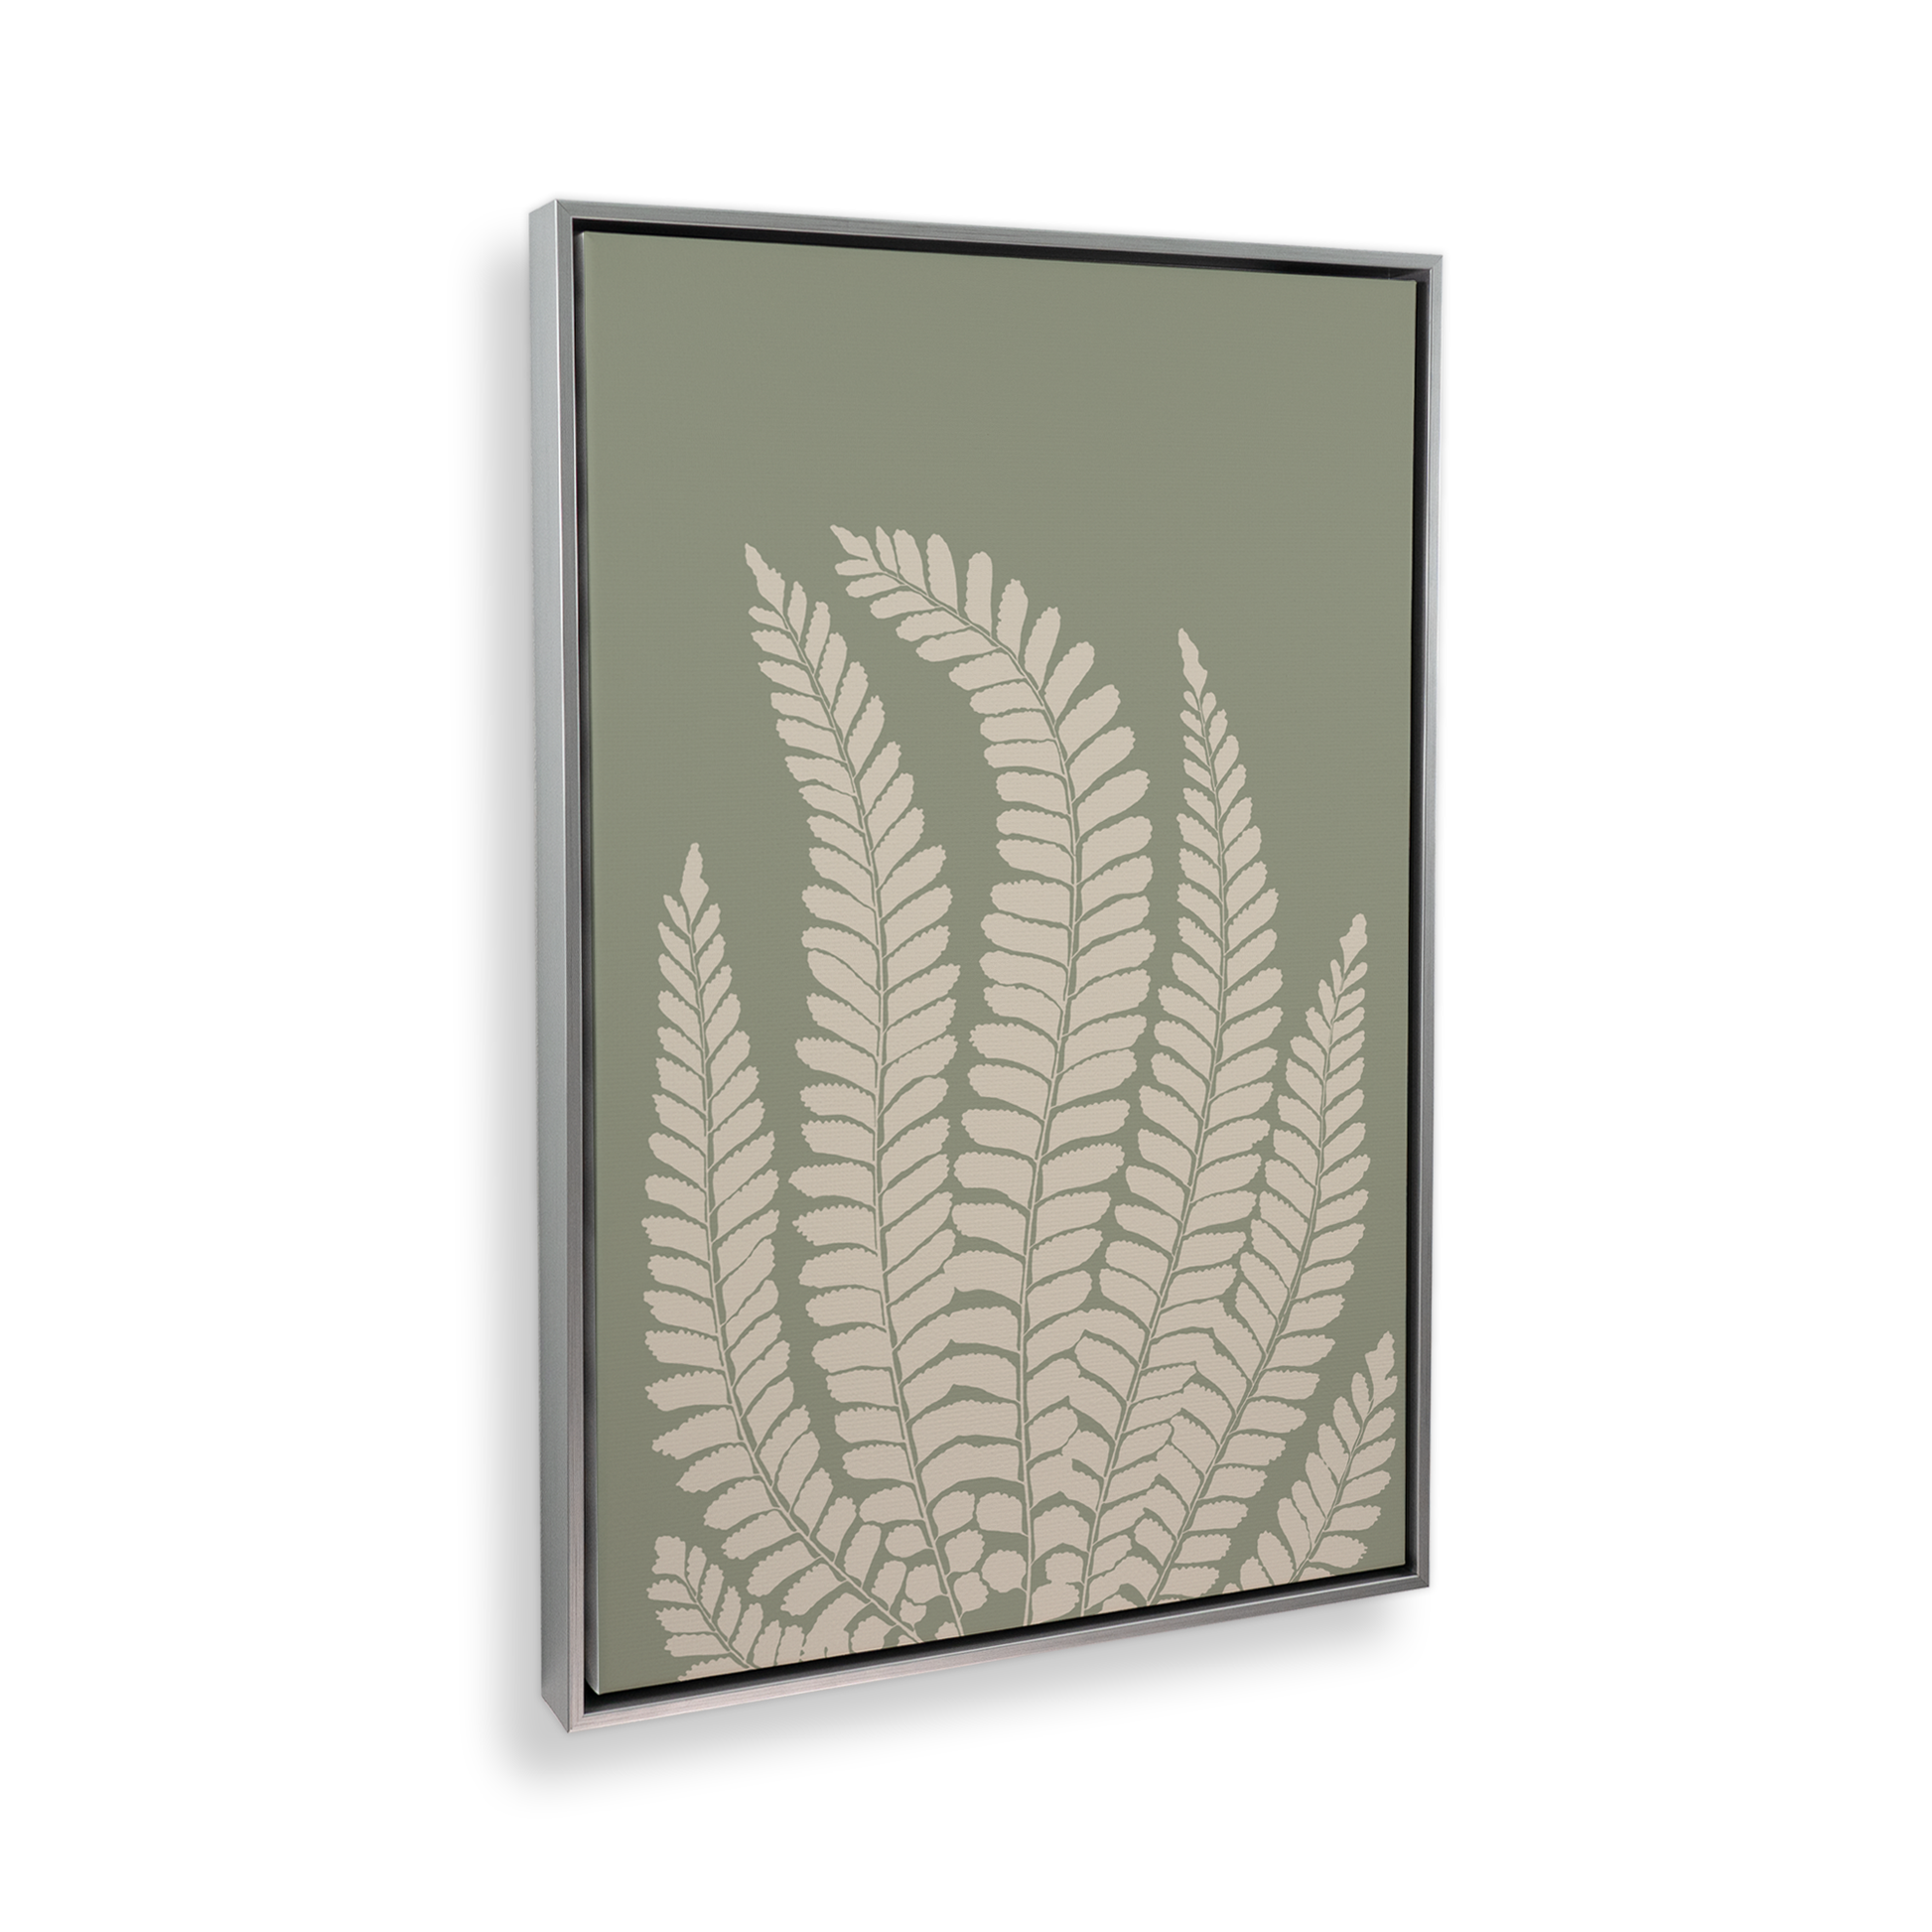 [color:Polished Chrome], Picture of art in a black frame at angle